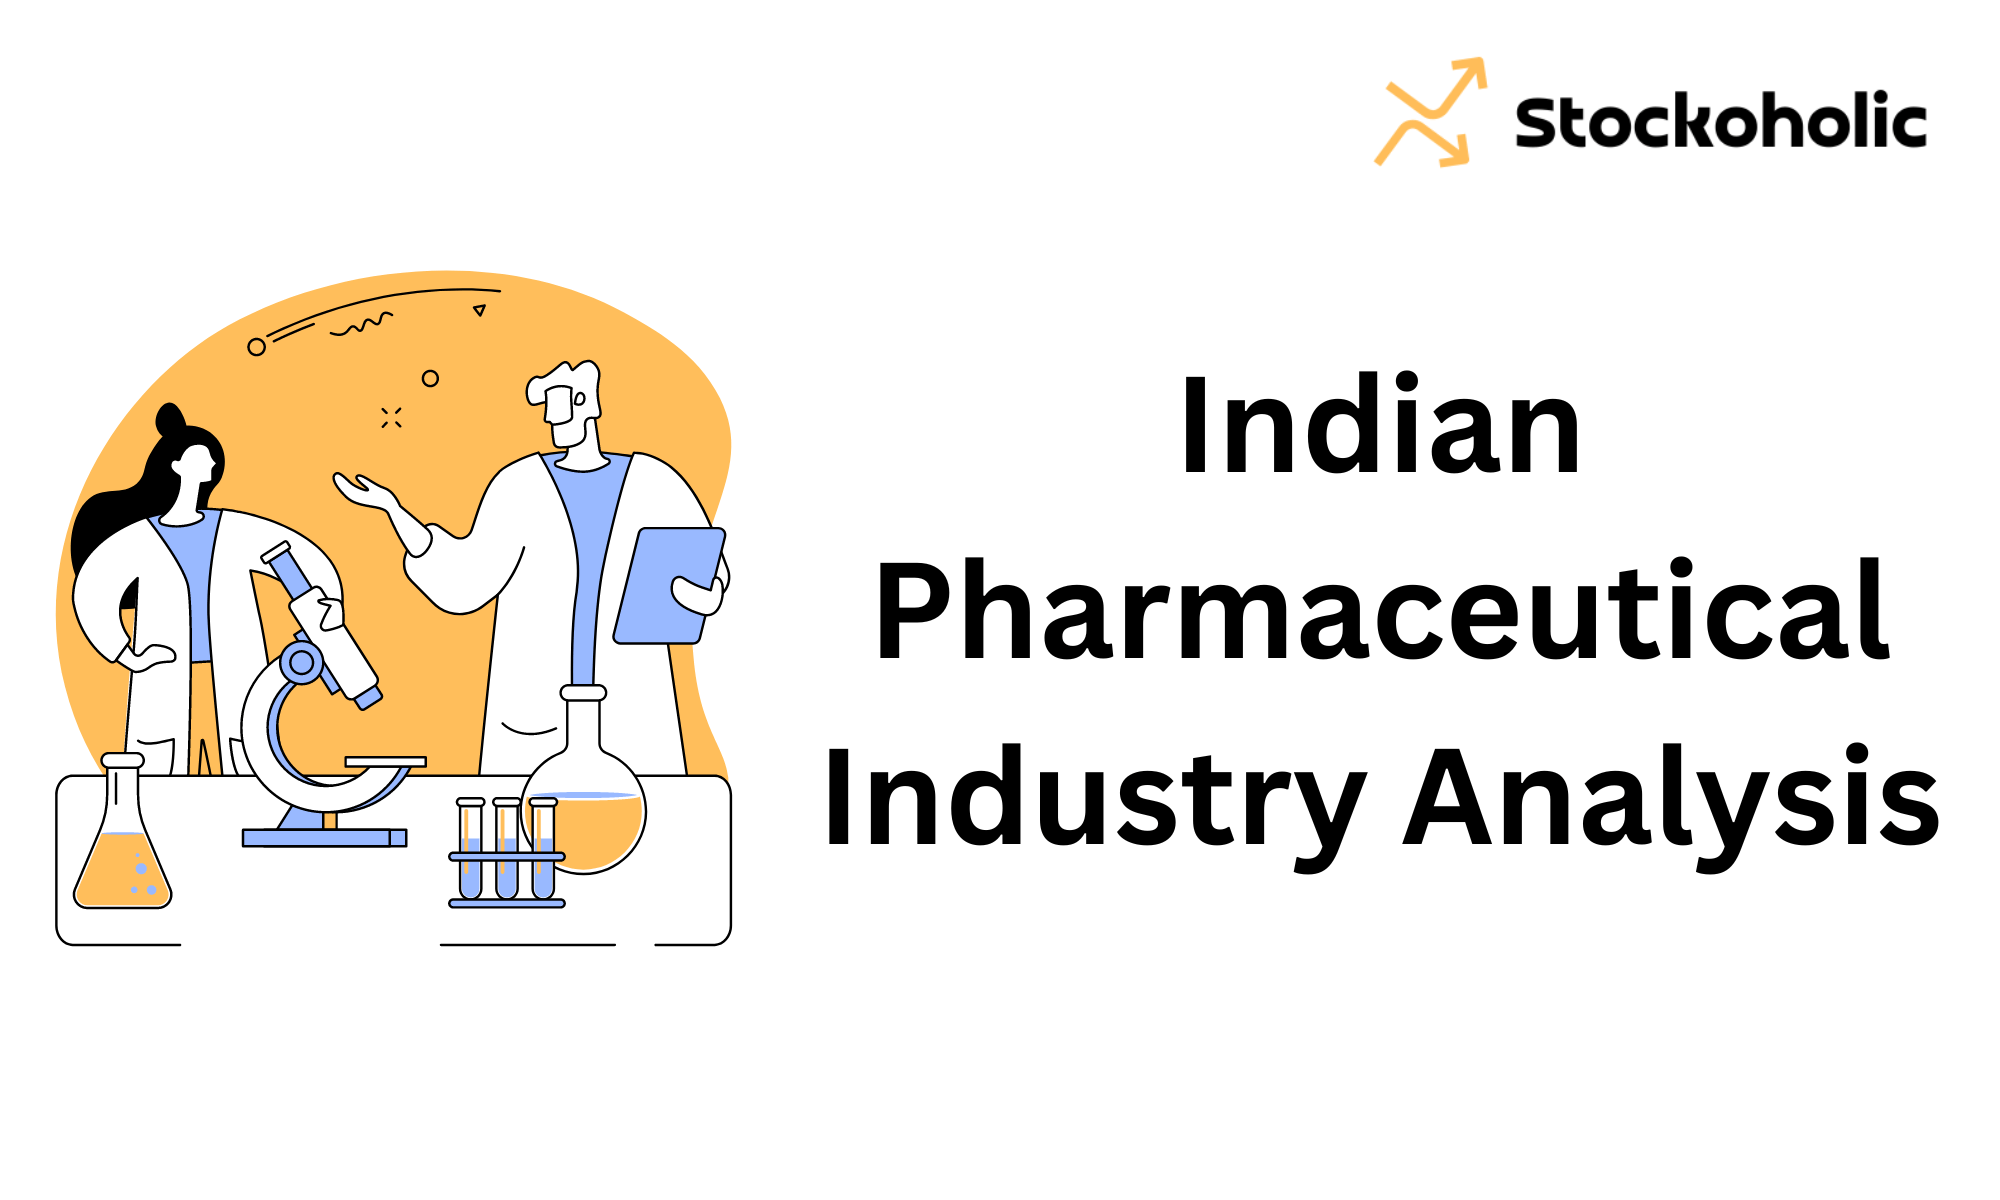 Indian pharmaceutical industry